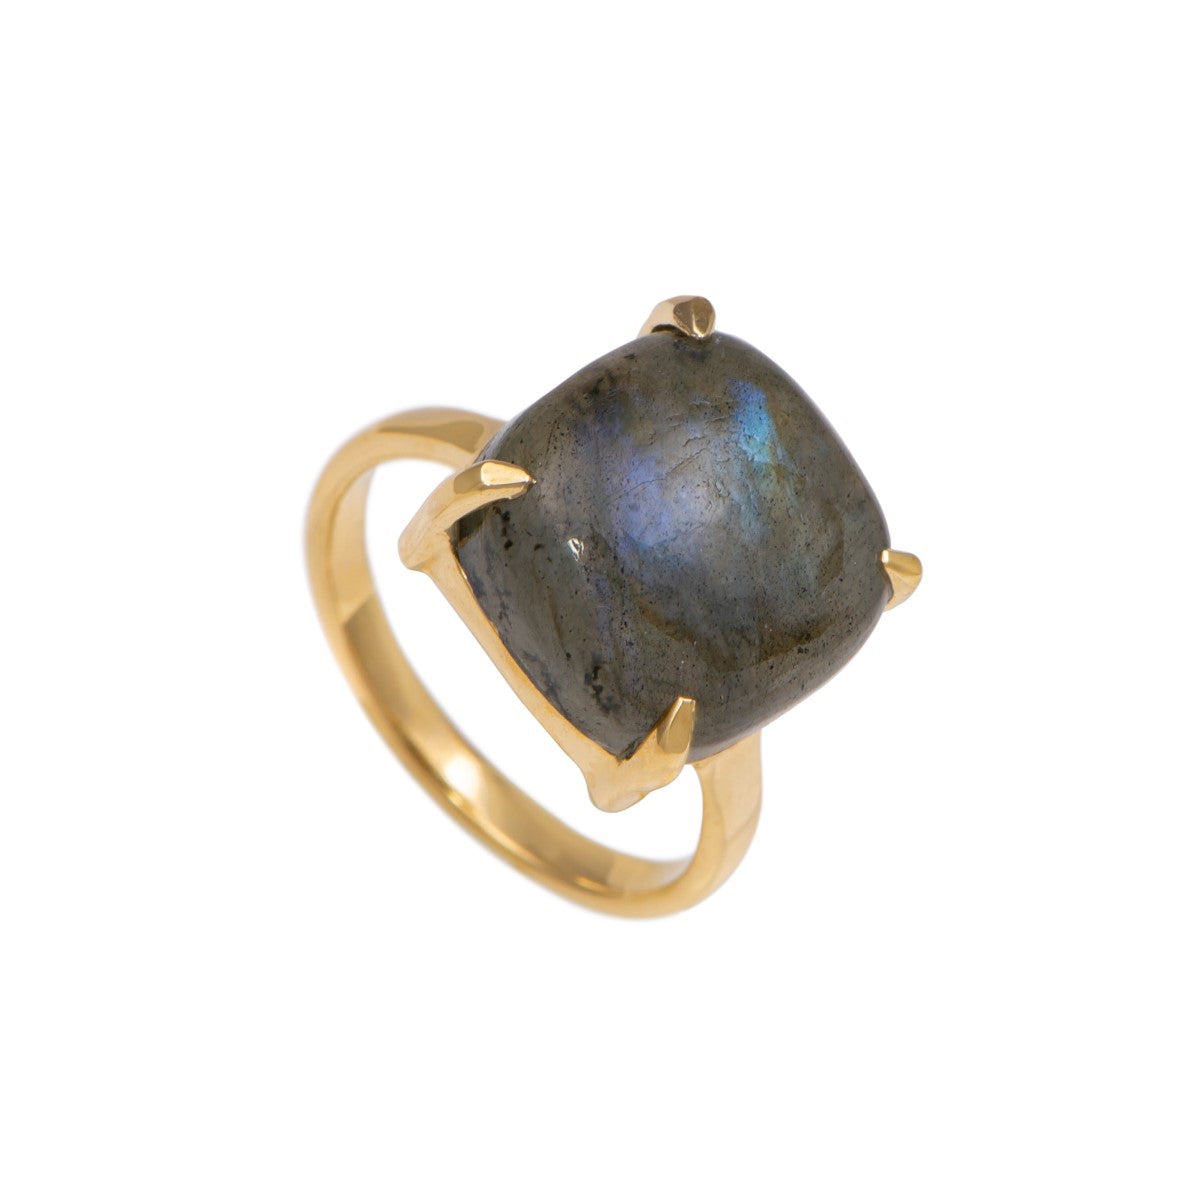 Square Cabochon Labradorite Ring in Gold Plated Sterling Silver